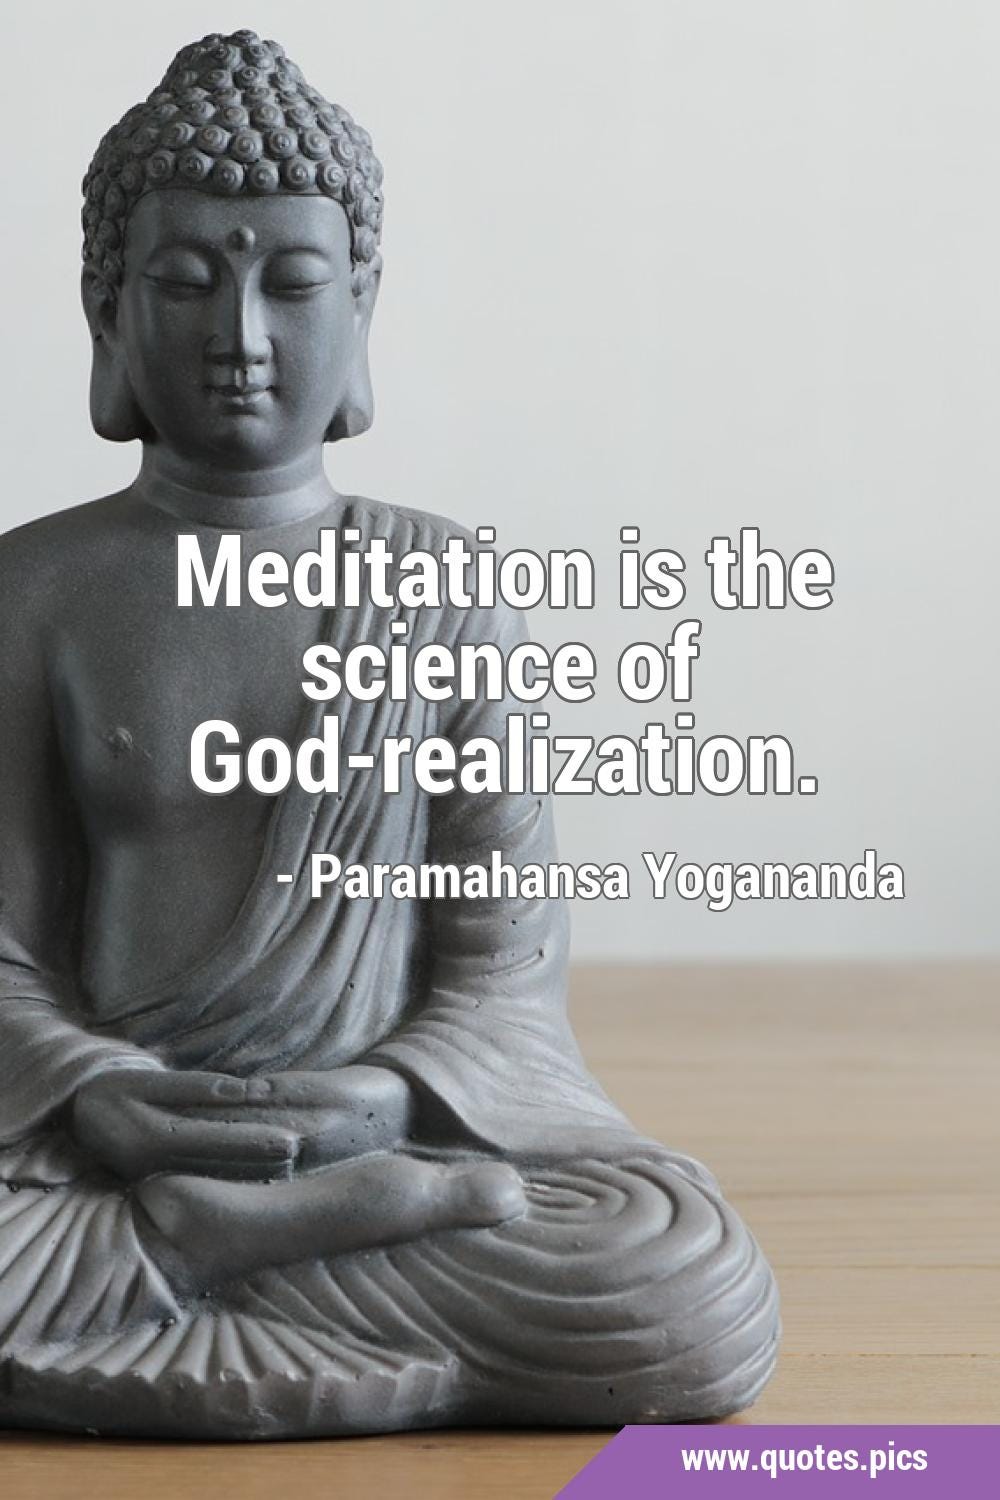 Meditation is the science of God-realization.